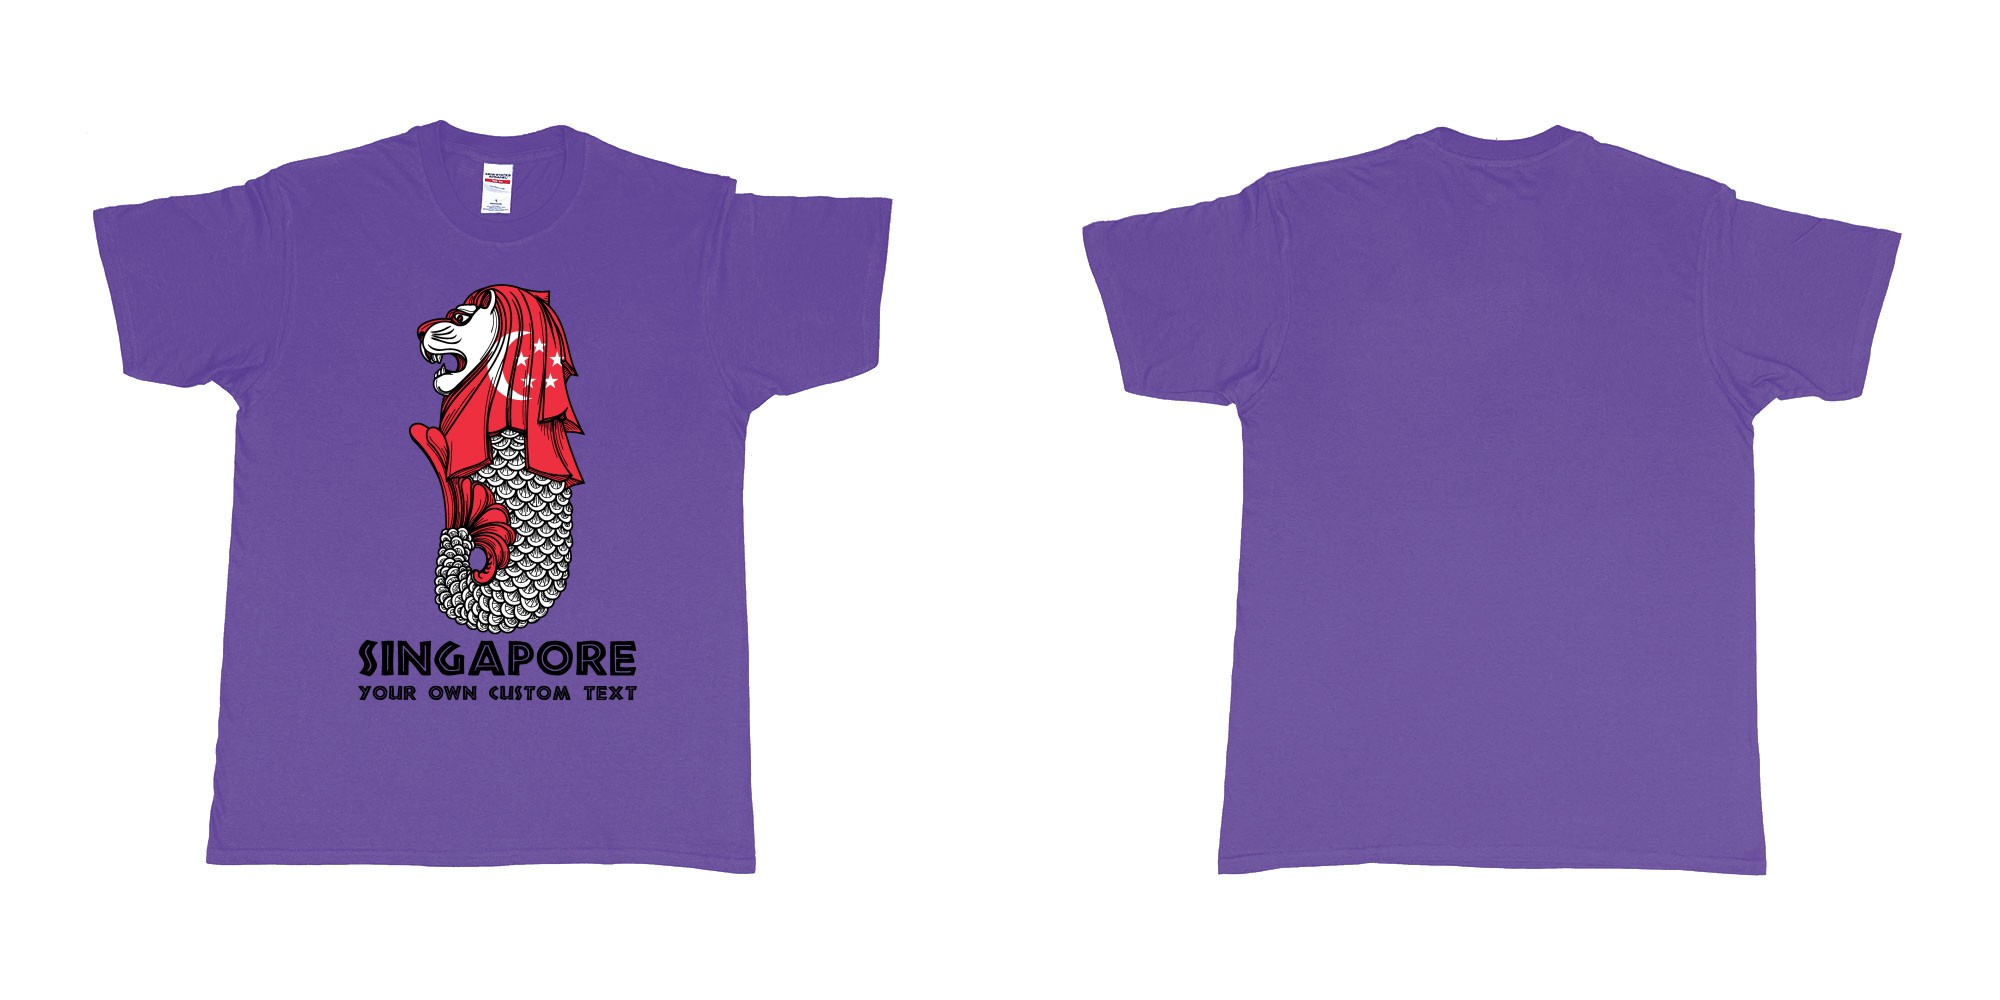 Custom tshirt design merlion singapore mascot statue lion in fabric color purple choice your own text made in Bali by The Pirate Way